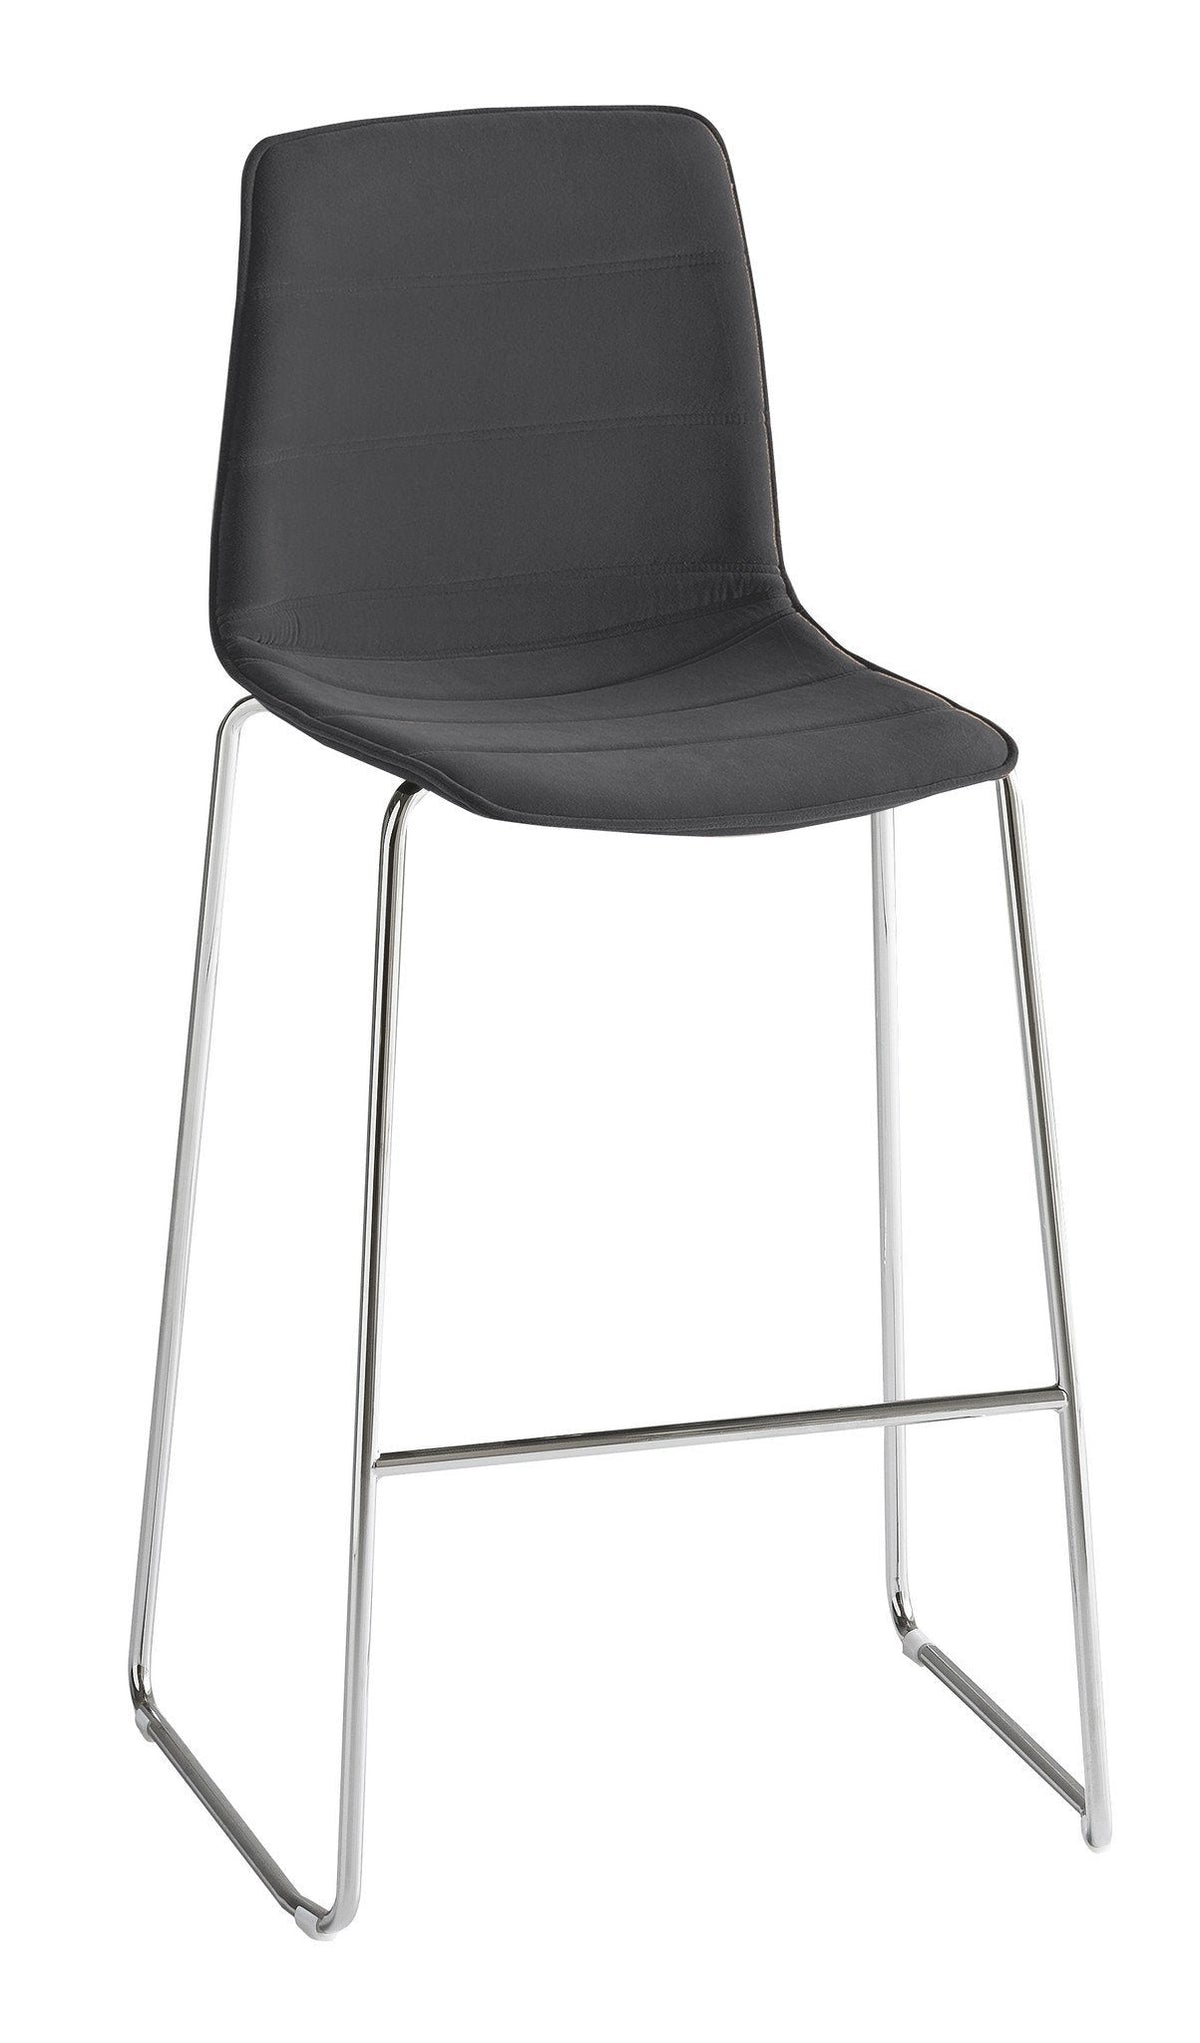 Alhambra High Stool c/w Sled Legs-Gaber-Contract Furniture Store